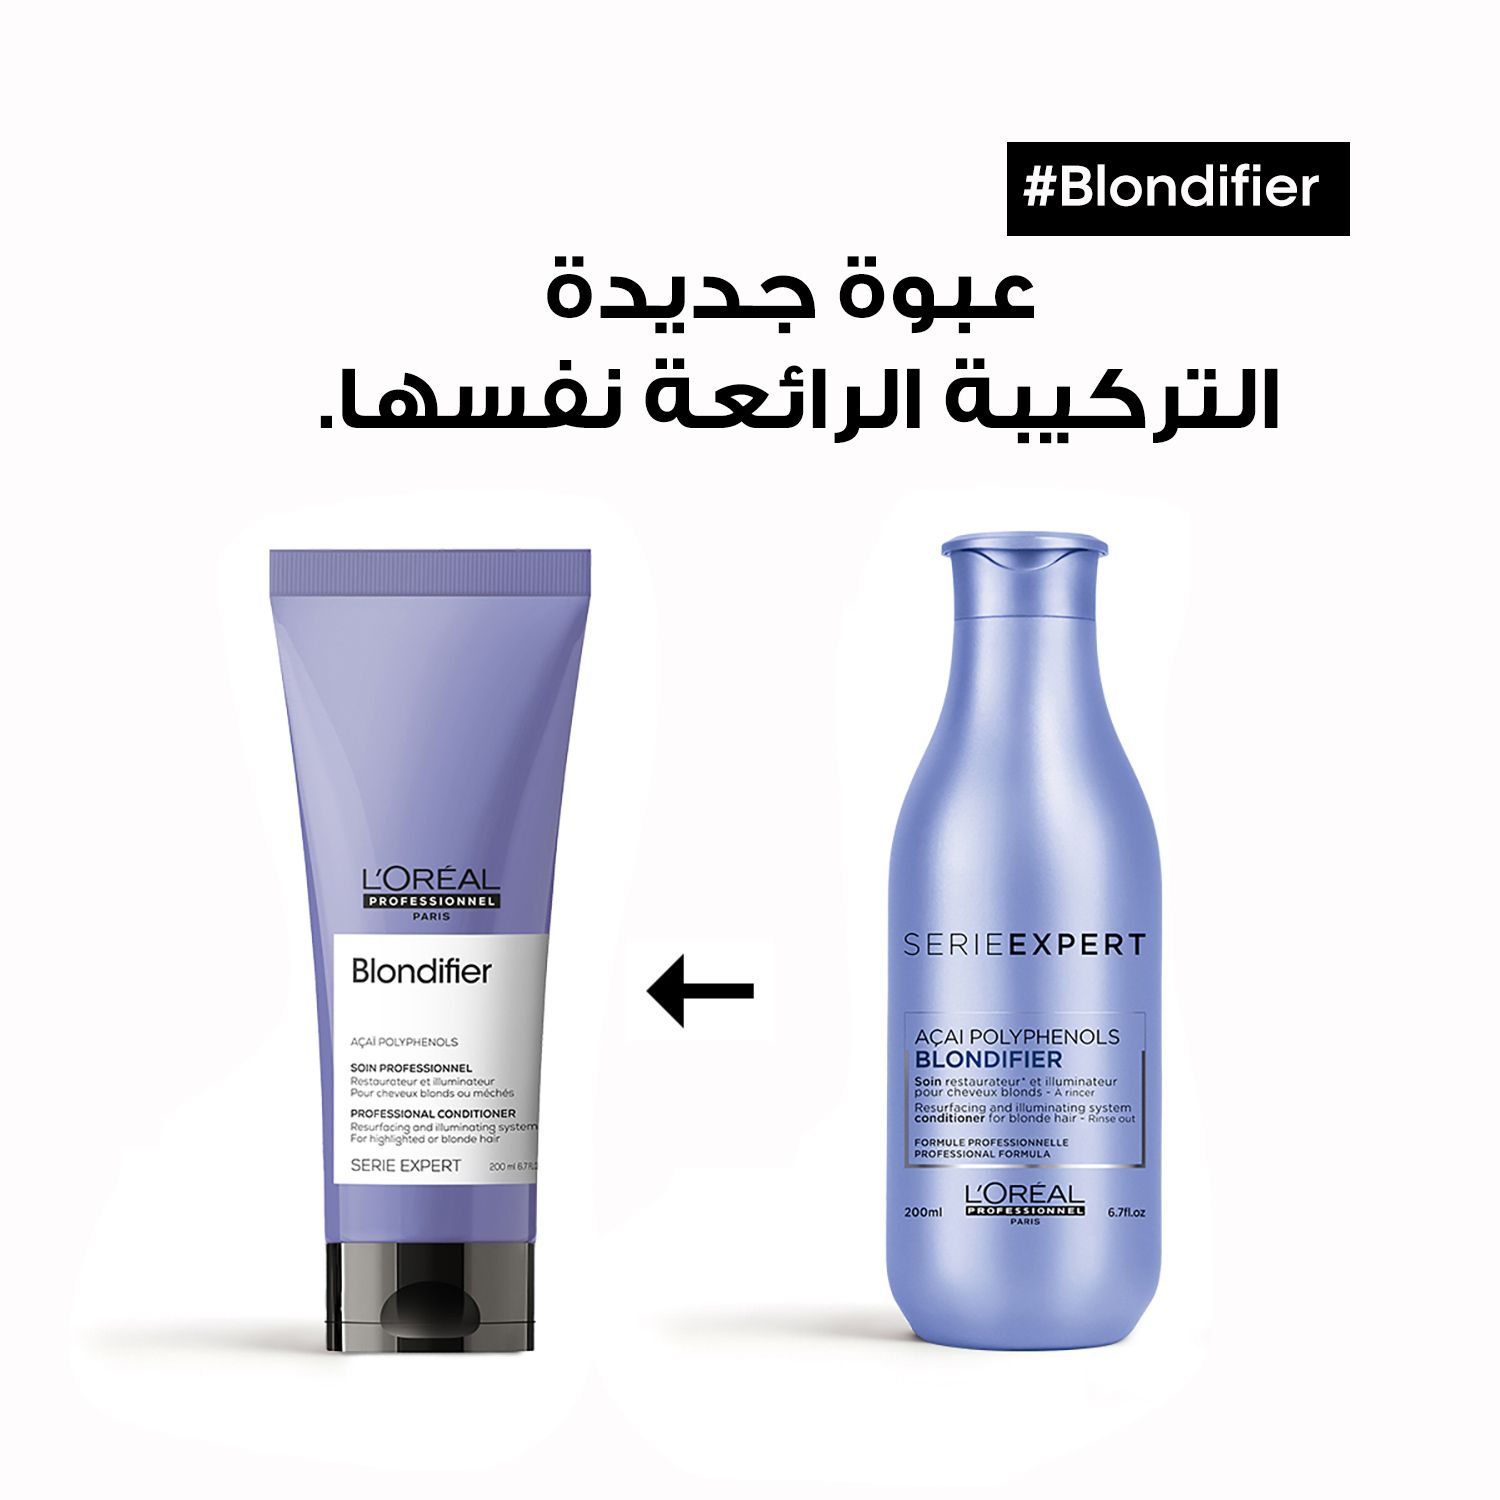 L’Oréal Professionnel Blondifier Conditioner for highlighted or blond hair SERIE EXPERT 200mL